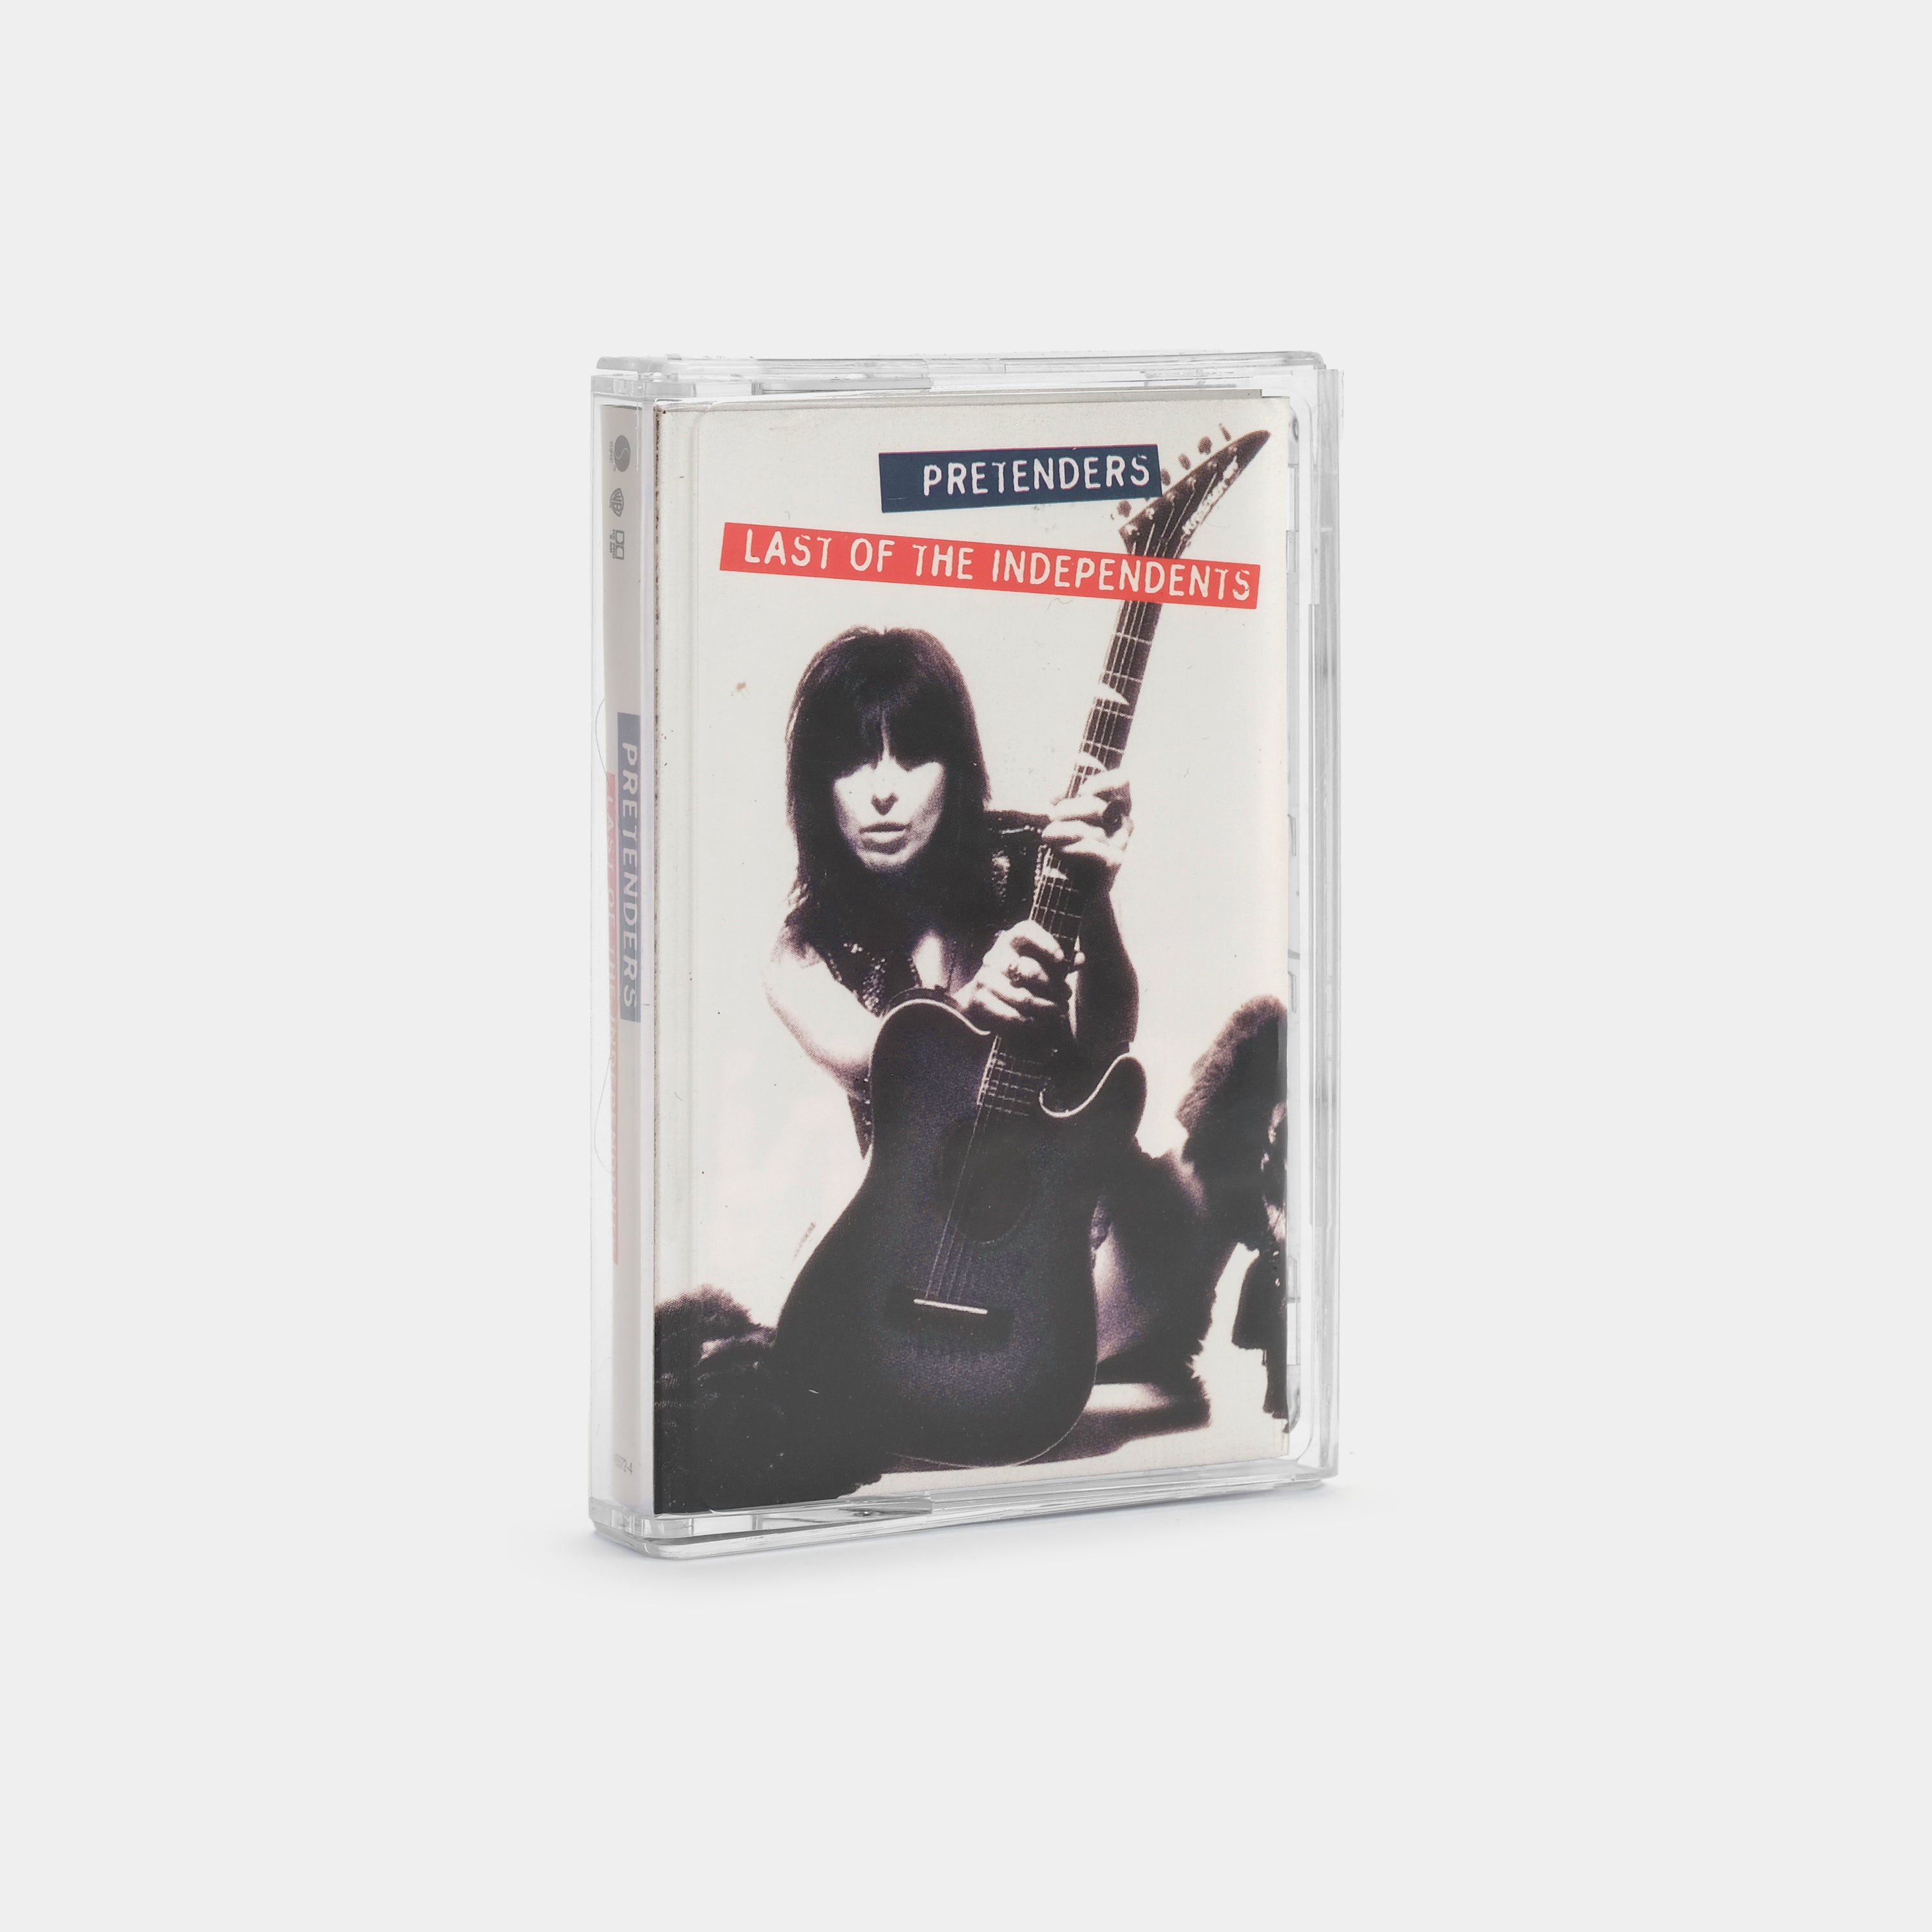 Pretenders - Last of the Independents Cassette Tape